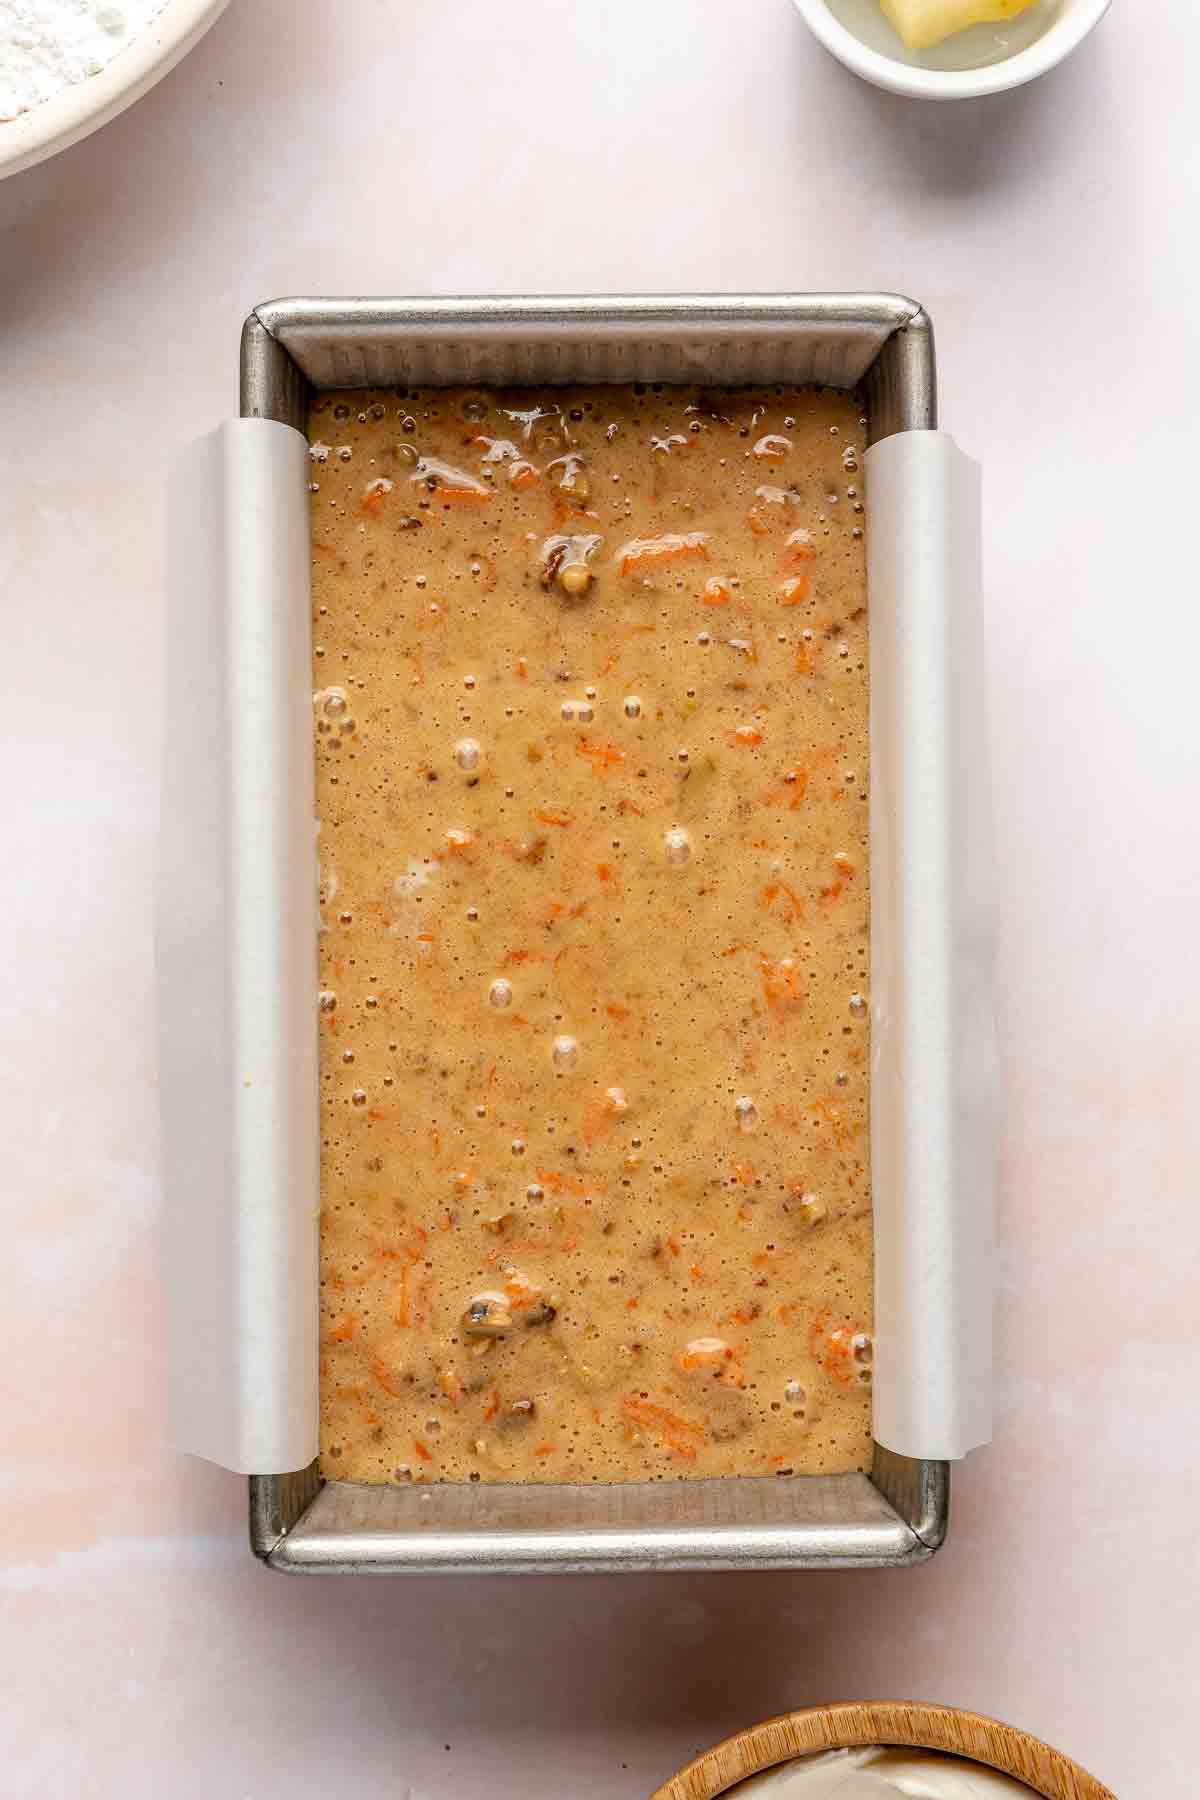 Carrot cake batter in a loaf pan lined with parchment paper.